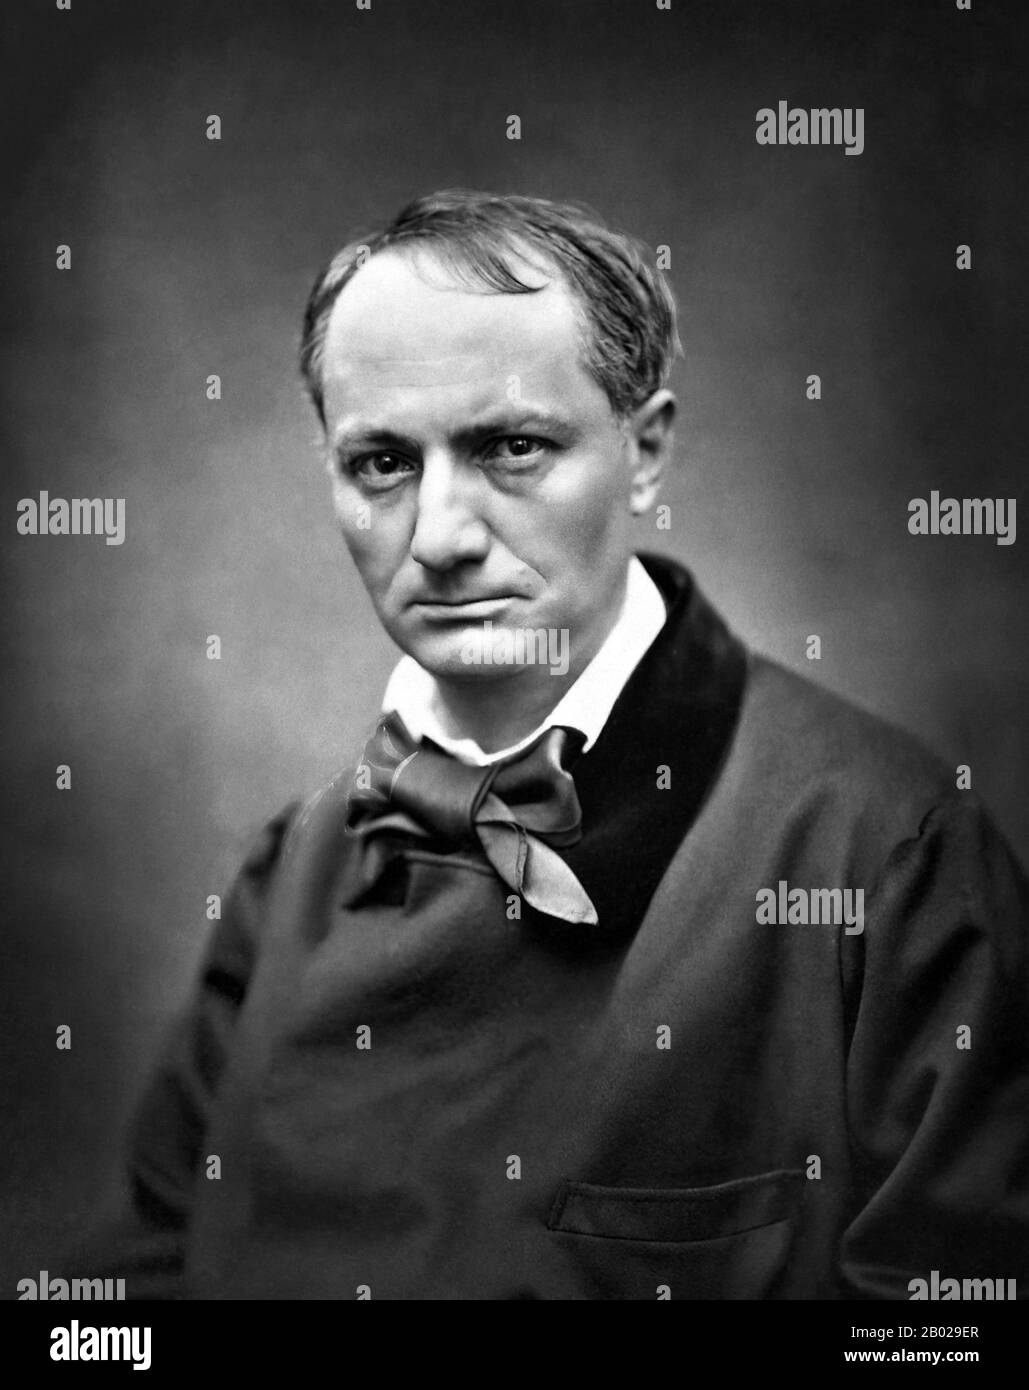 Charles Pierre Baudelaire (April 9, 1821 – August 31, 1867) was a French poet who produced notable work as an essayist, art critic, and pioneering translator of Edgar Allan Poe. His most famous work, Les Fleurs du mal (The Flowers of Evil), expresses the changing nature of beauty in modern, industrializing Paris during the 19th century.  Baudelaire's highly original style of prose-poetry influenced a whole generation of poets including Paul Verlaine, Arthur Rimbaud and Stéphane Mallarmé among many others. He is credited with coining the term 'modernity' (modernité) to designate the fleeting, e Stock Photo